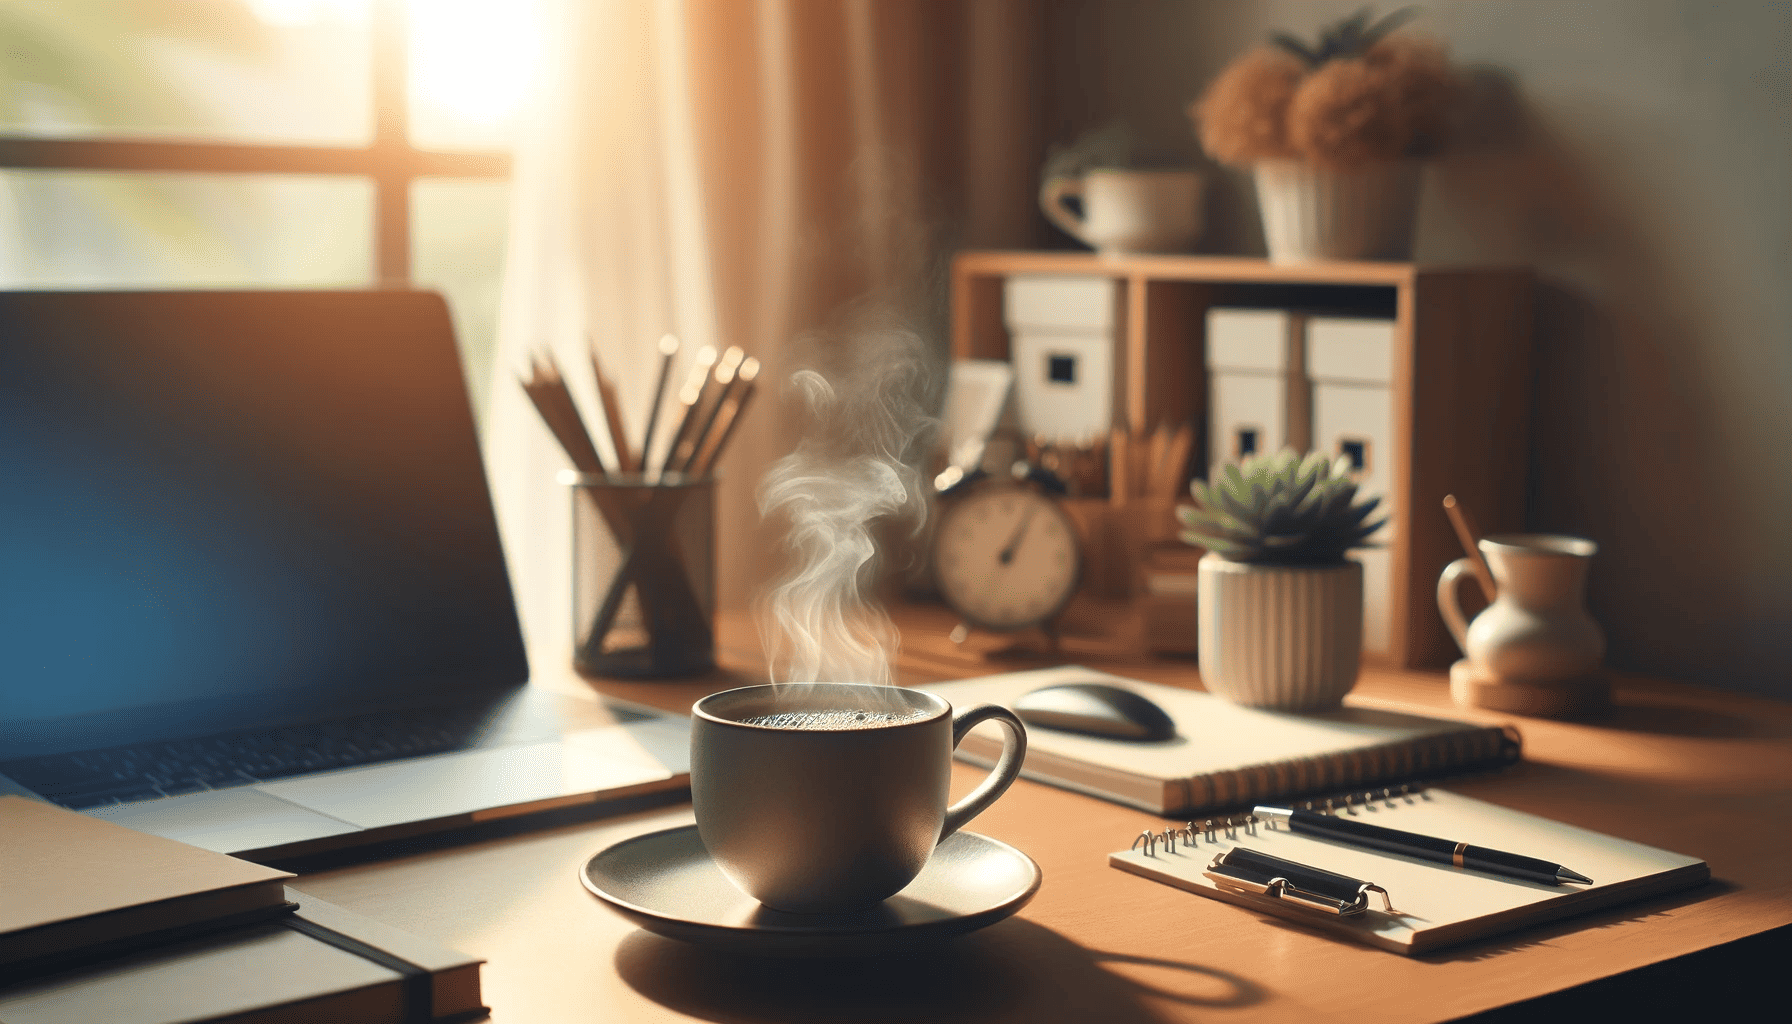 A steaming cup of coffee on a neatly organized work desk